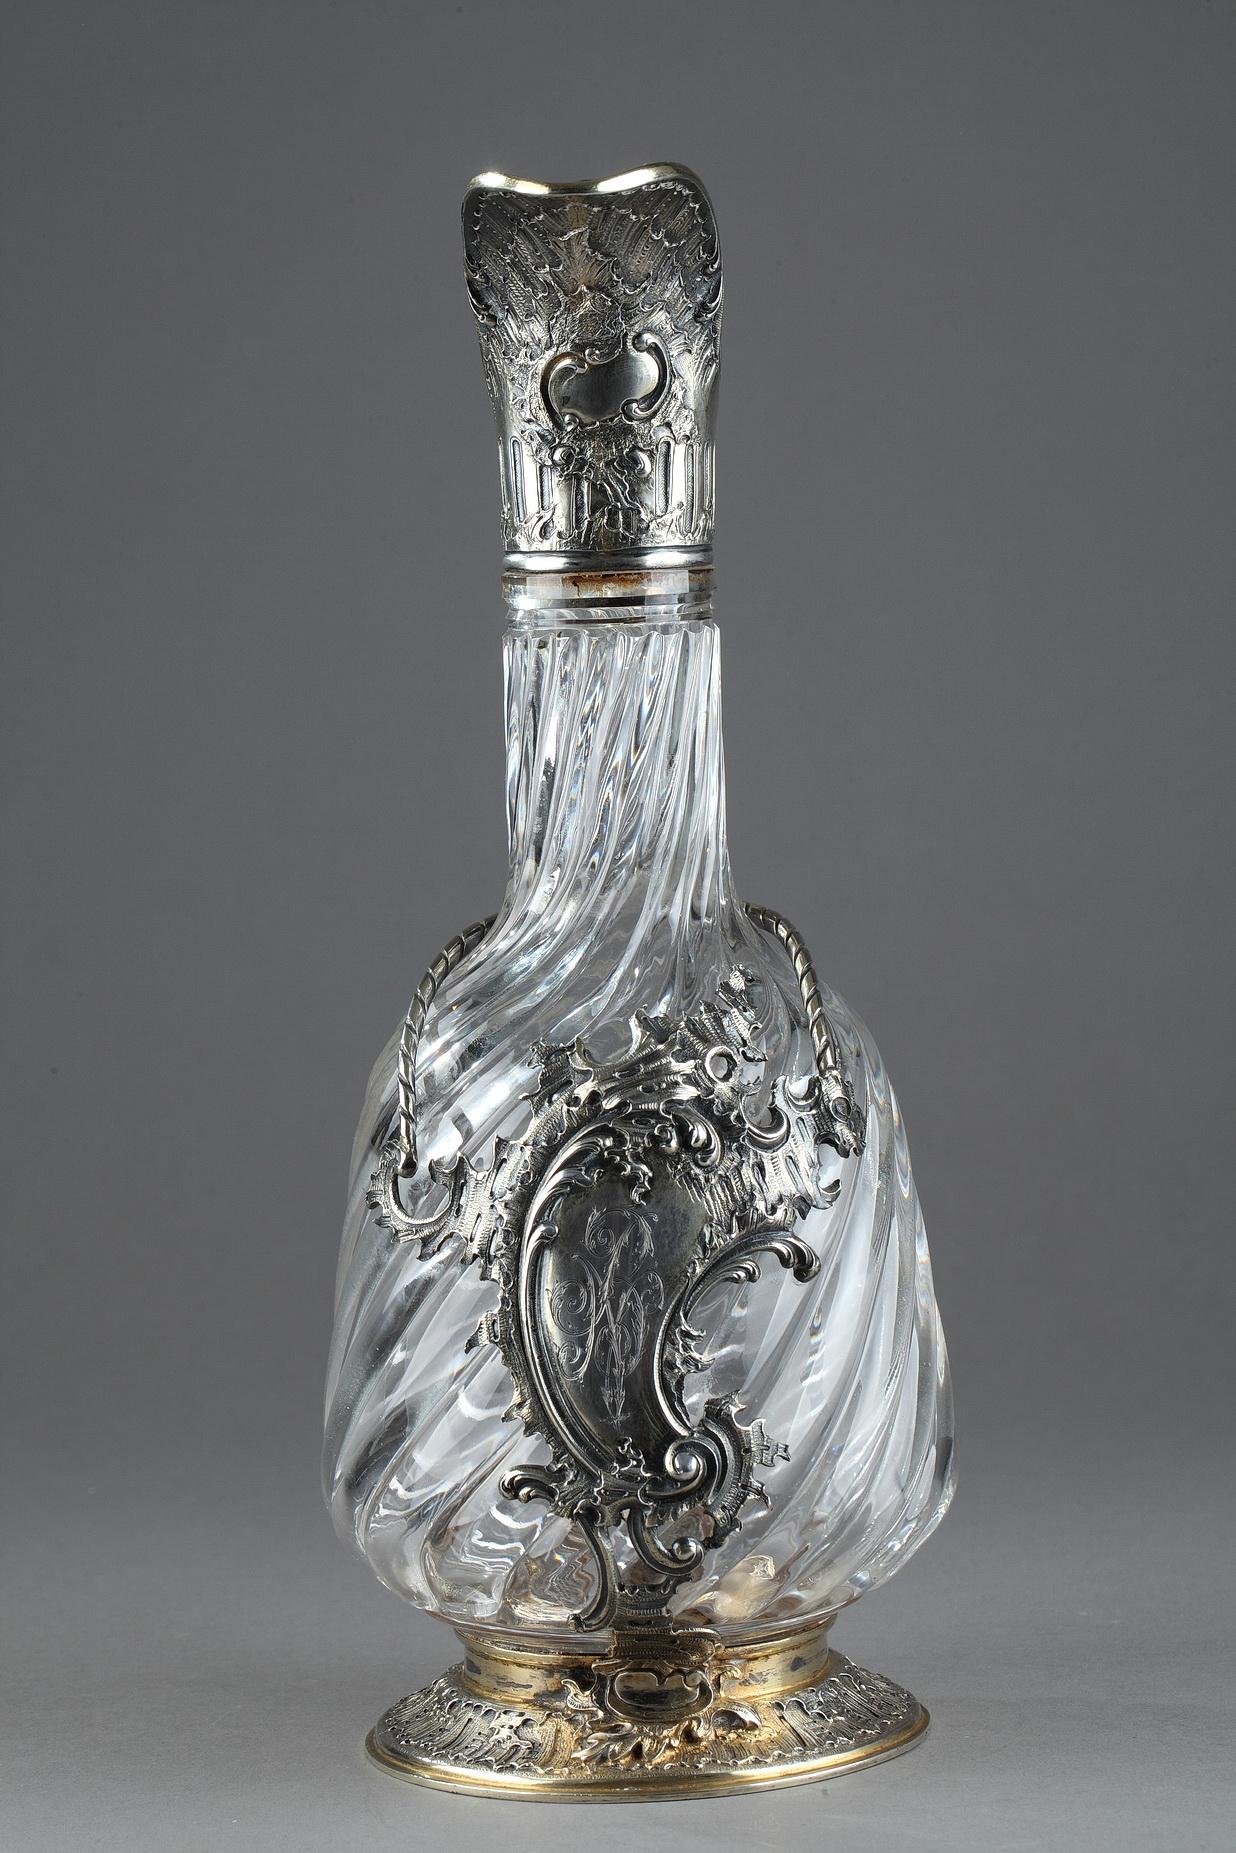 Ewer in crystal and cut with gadroons. The crystal is set in a silver setting with a rococo cartel decoration shredded on the body. The handle is divided into two parts and the neck is finely chiseled with patterns of grooves and rocaille. The grip